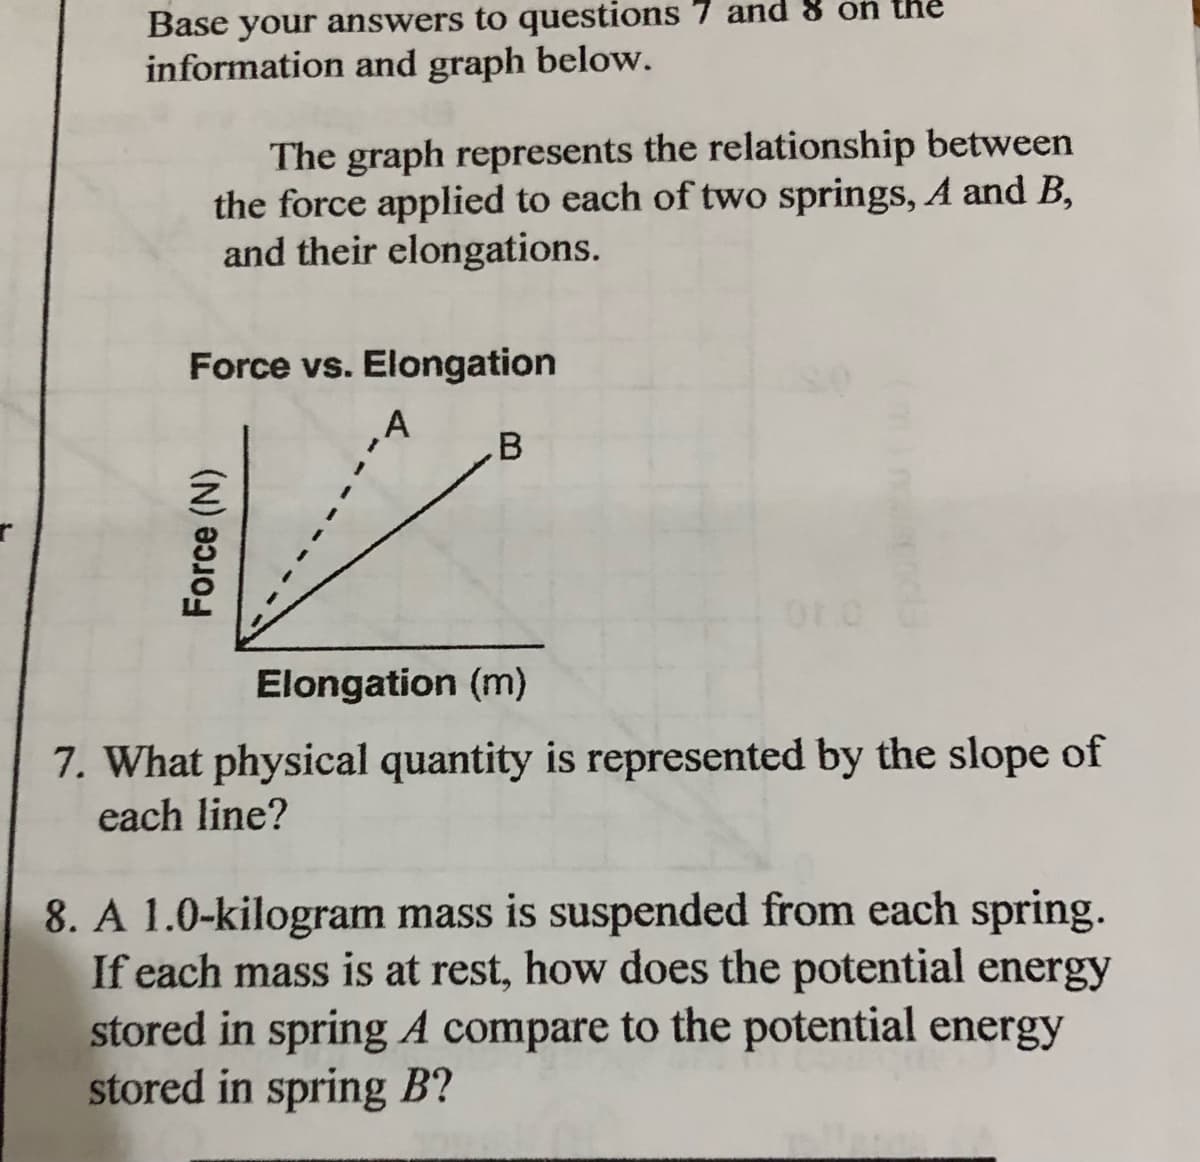 Base your answers to questions 7 and 8 on the
information and graph below.
The graph represents the relationship between
the force applied to each of two springs, A and B,
and their elongations.
Force vs. Elongation
.B
Elongation (m)
7. What physical quantity is represented by the slope of
each line?
8. A 1.0-kilogram mass is suspended from each spring.
If each mass is at rest, how does the potential energy
stored in spring A compare to the potential energy
stored in spring B?
Force (N)
